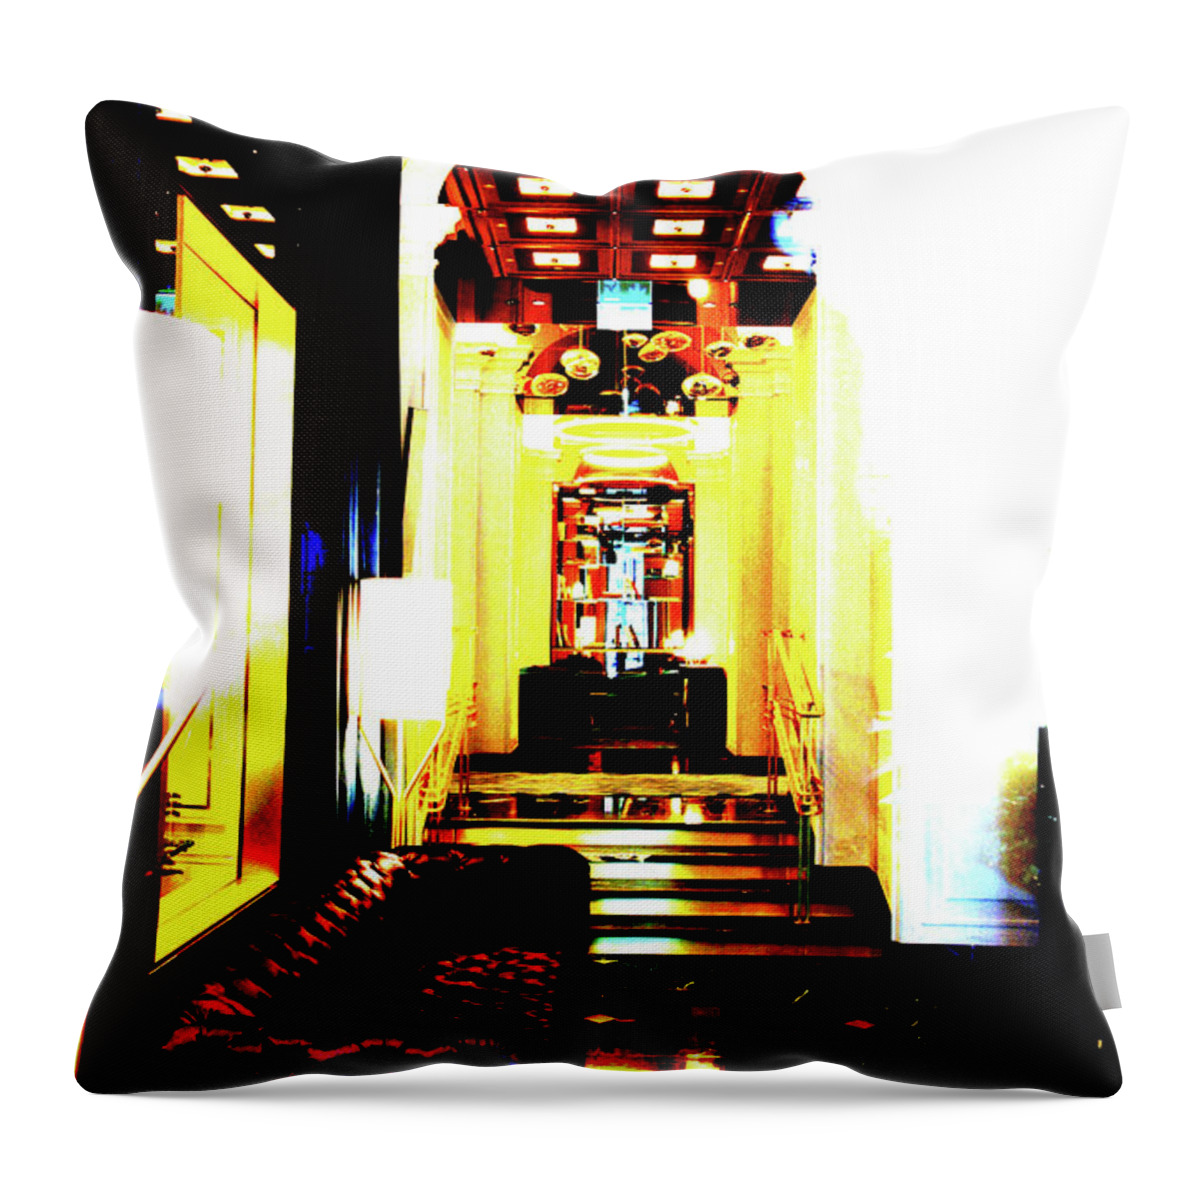 Hotel Throw Pillow featuring the photograph Hotel Interior In Warsaw, Poland by John Siest